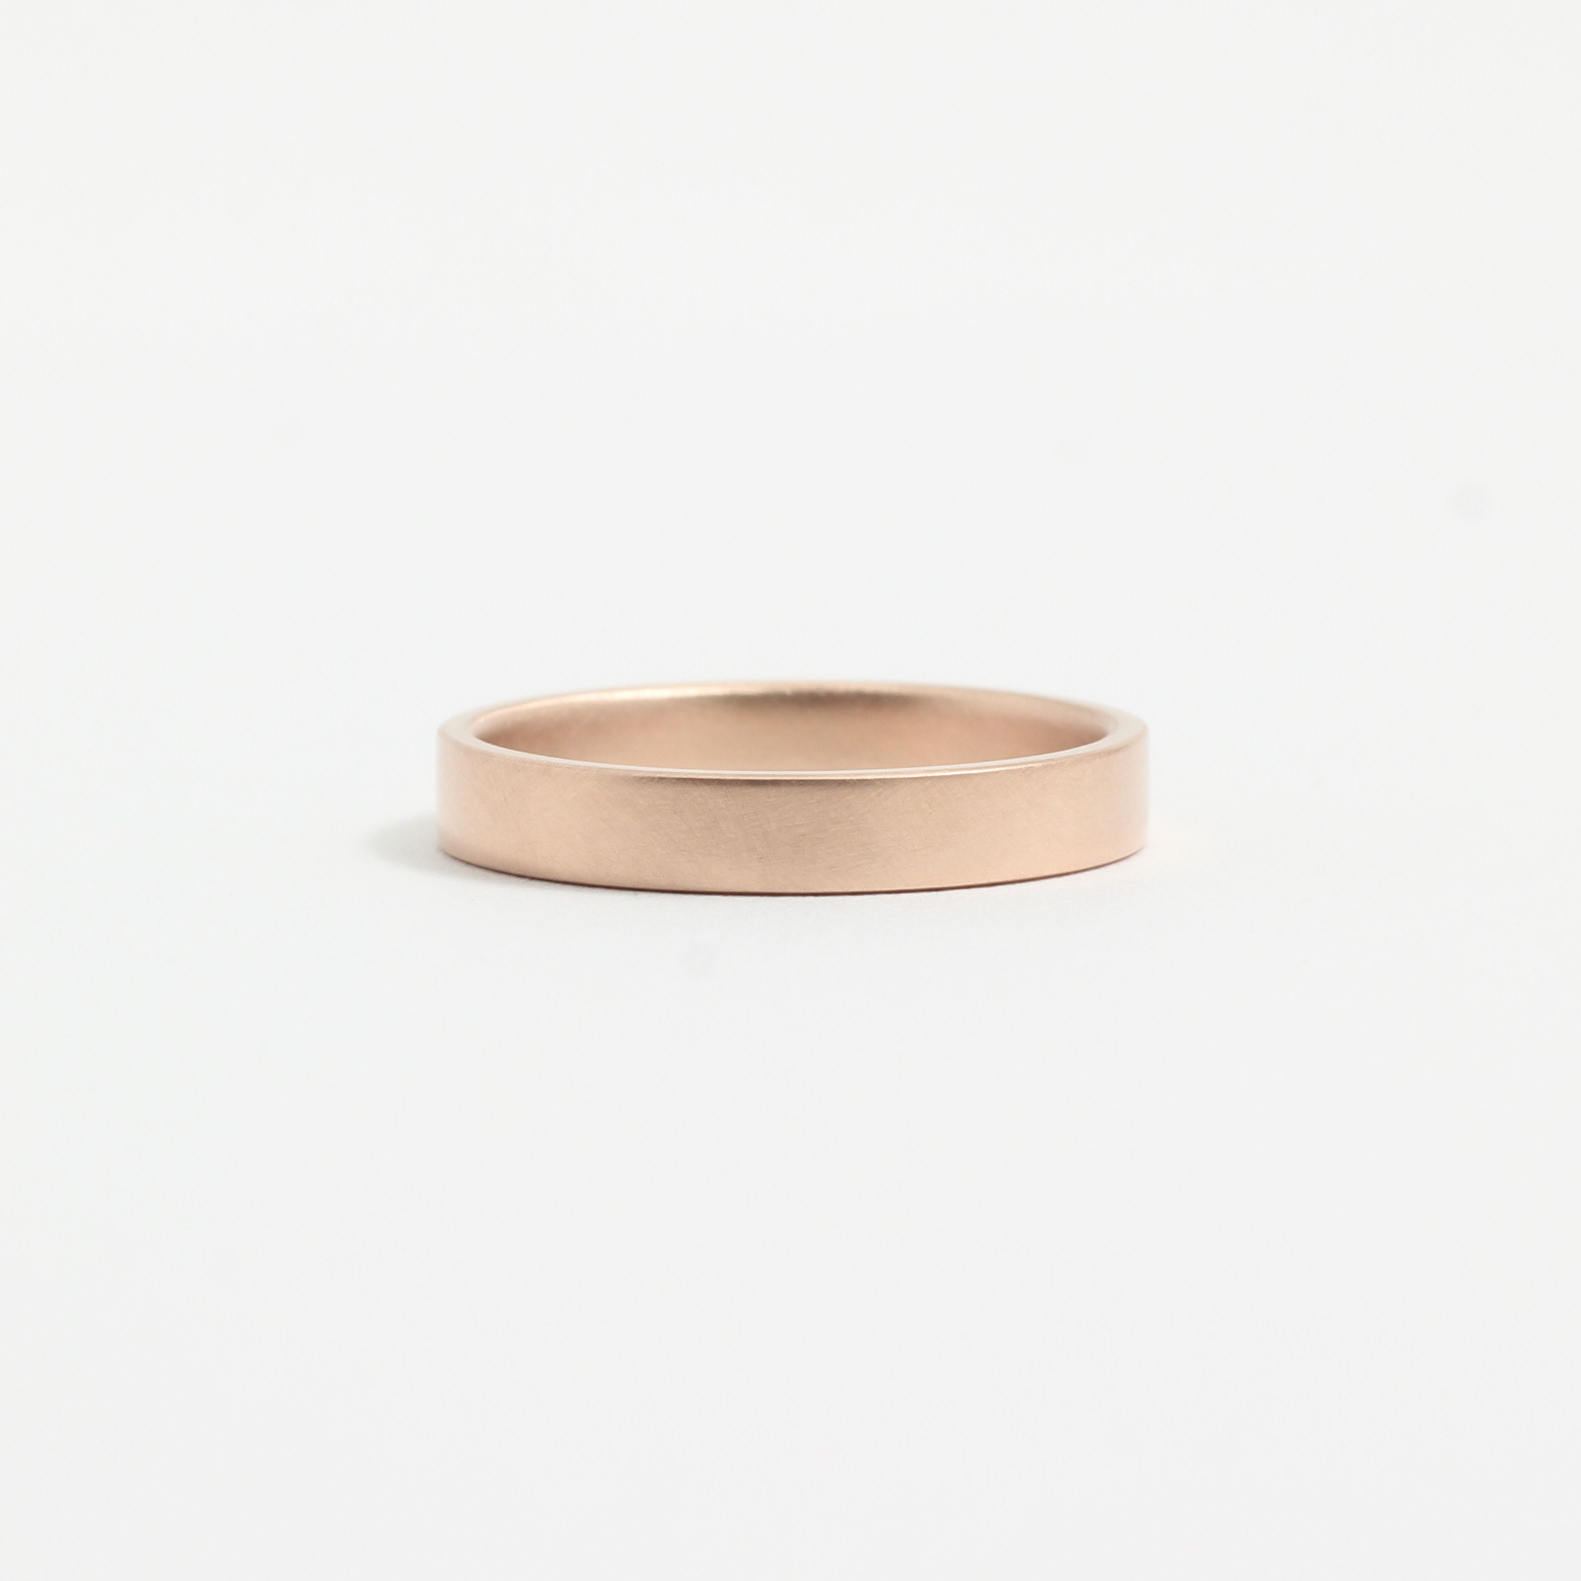 A gold wedding band from Good Gold